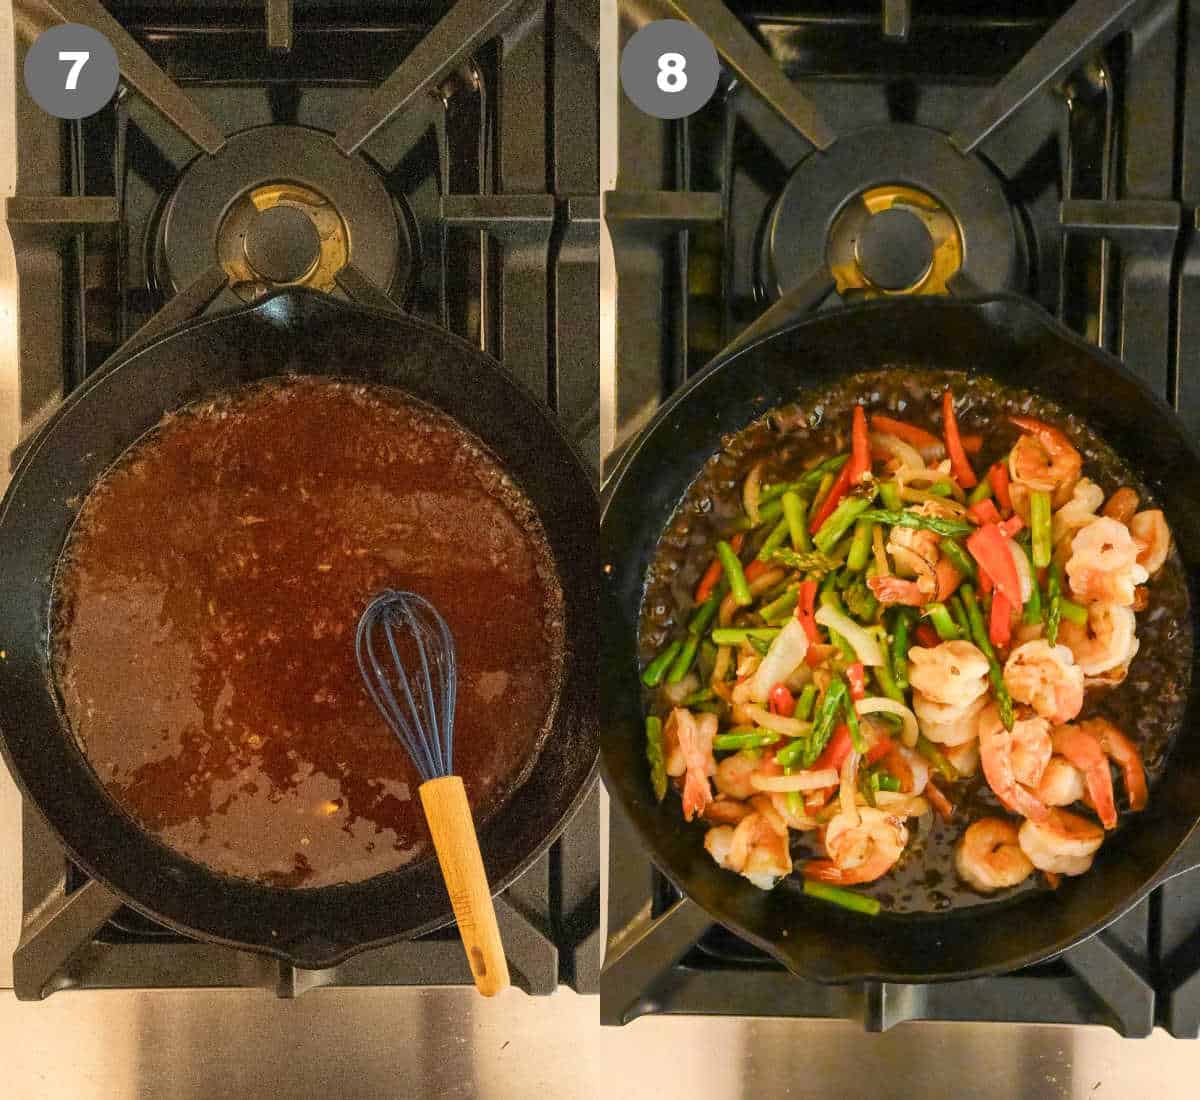 The sauce mixed together in a cast iron skillet then the cooked shrimp and veggies added into the sauce.